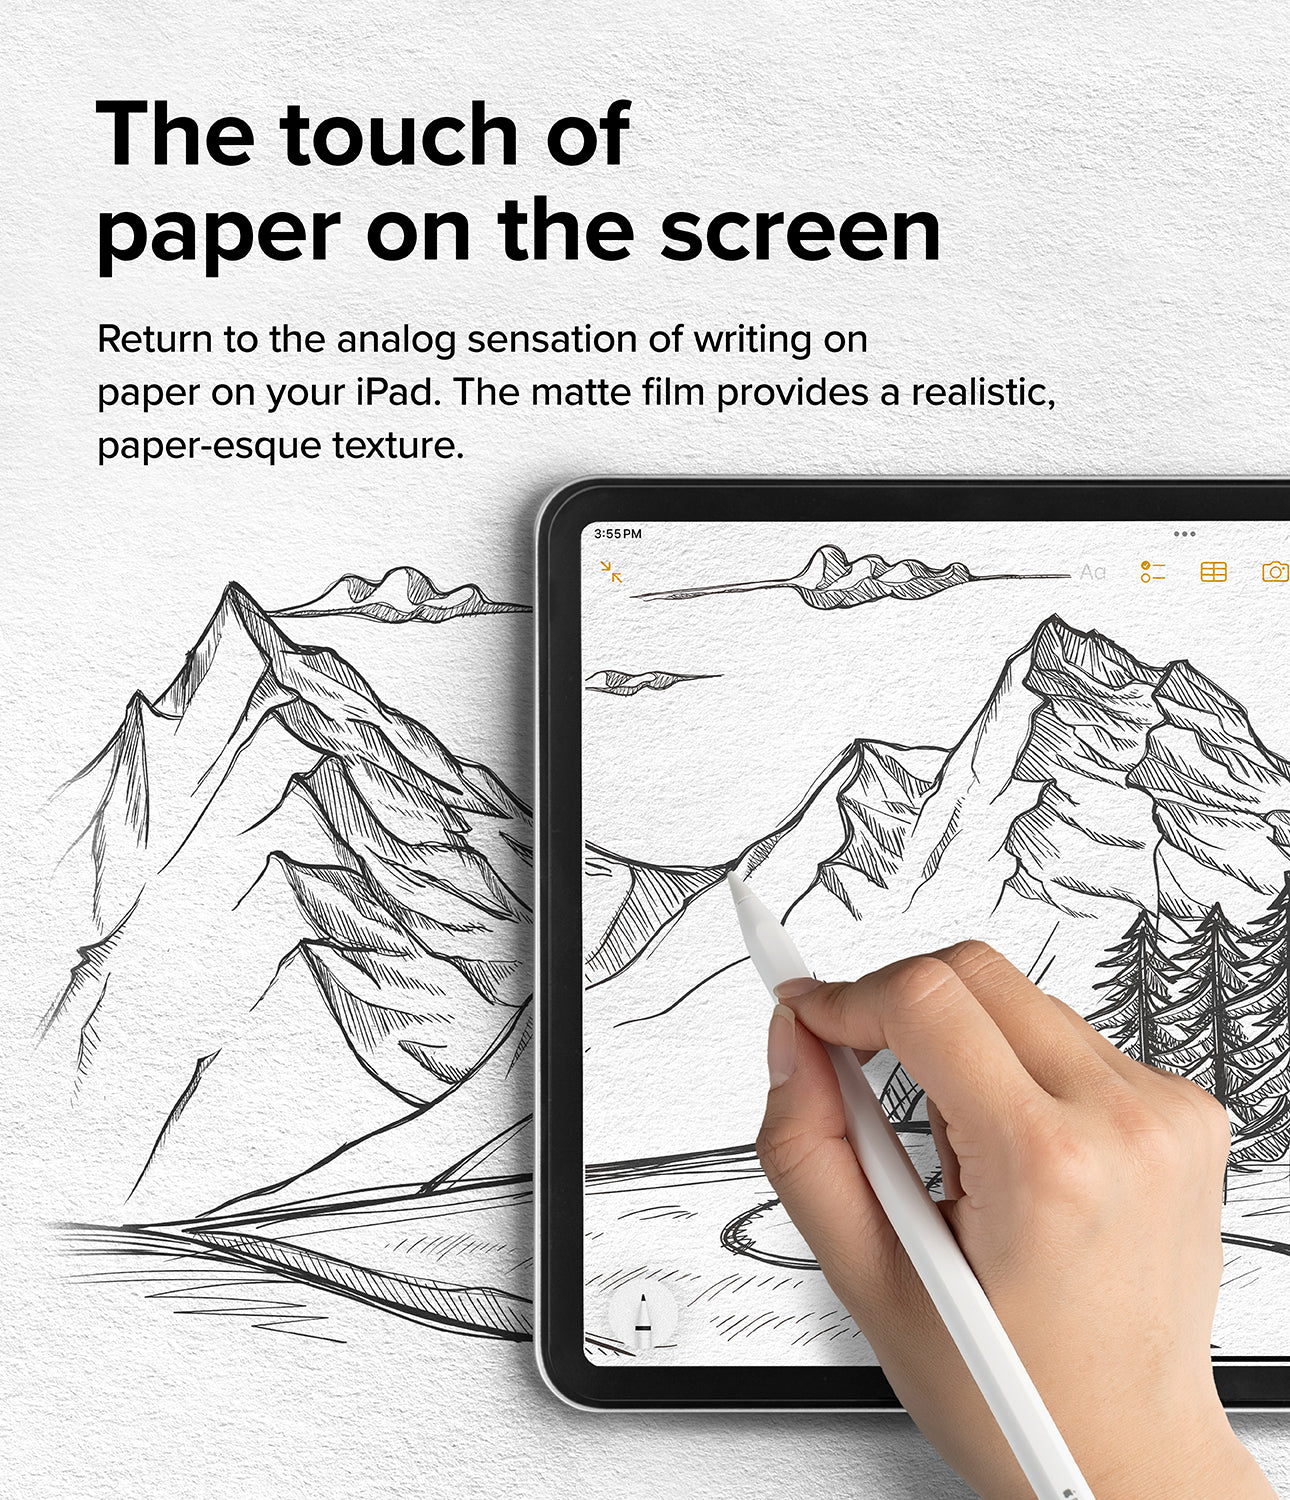 iPad Pro 11" (M4) Screen Protector | Paper Touch Film - The touch of paper on the screen. Return to the analog sensation of writing on paper on your iPad. The matte film provides a realistic, paper-esque texture.